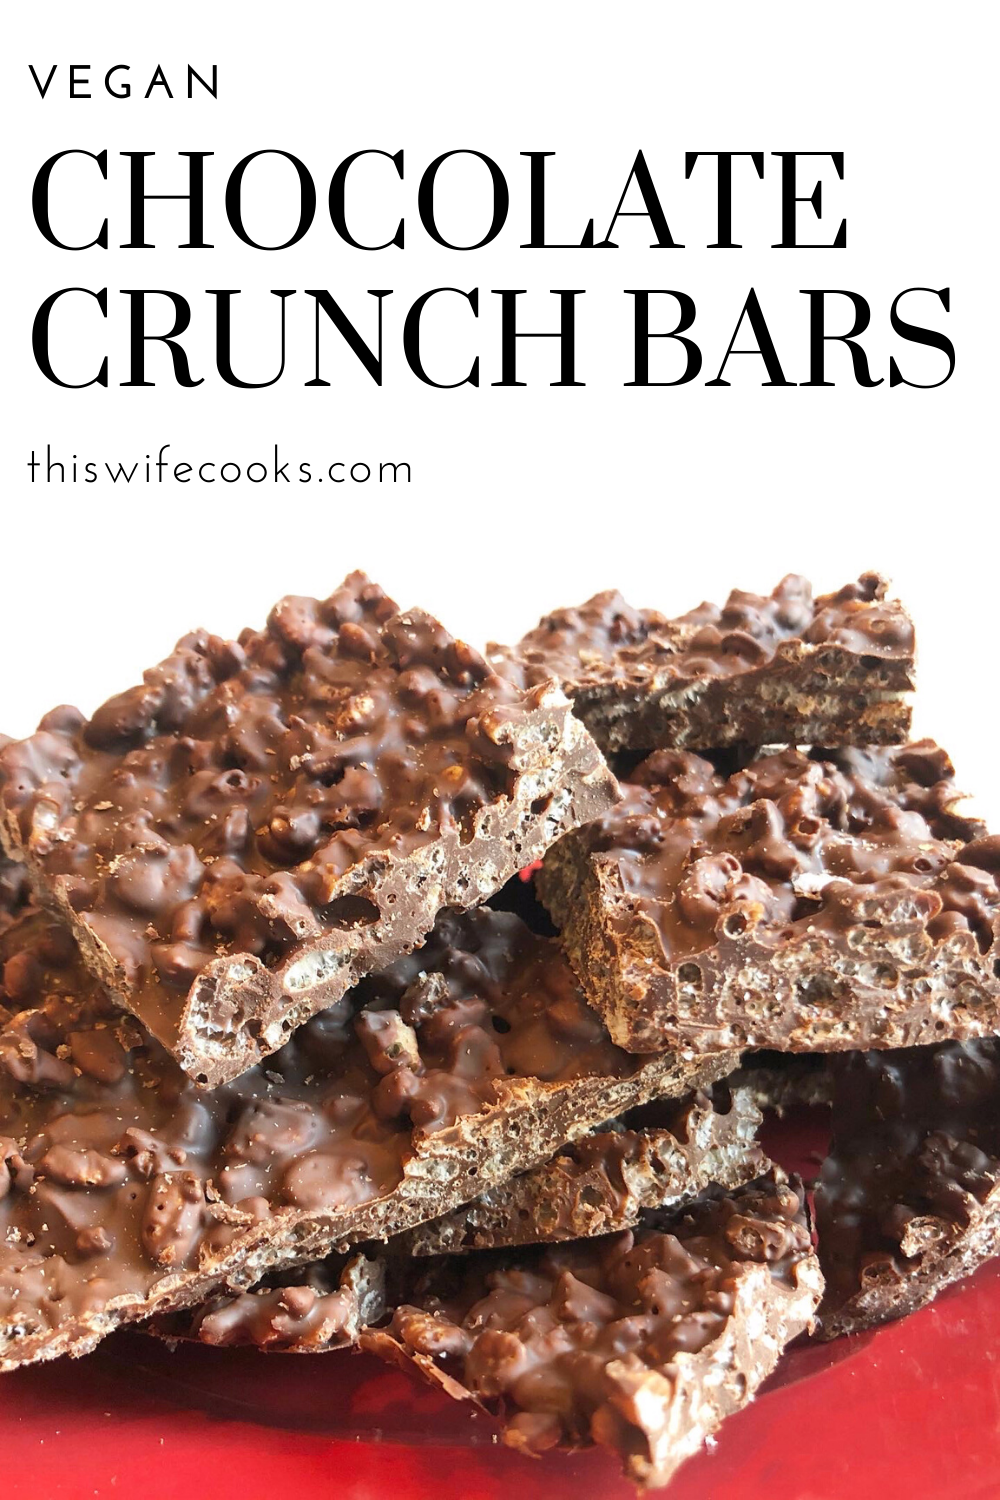 Vegan Chocolate Crunch Bars - Super quick & always popular! Perfect for holidays, class parties or any time you're craving a sweet & simple candy treat. via @thiswifecooks